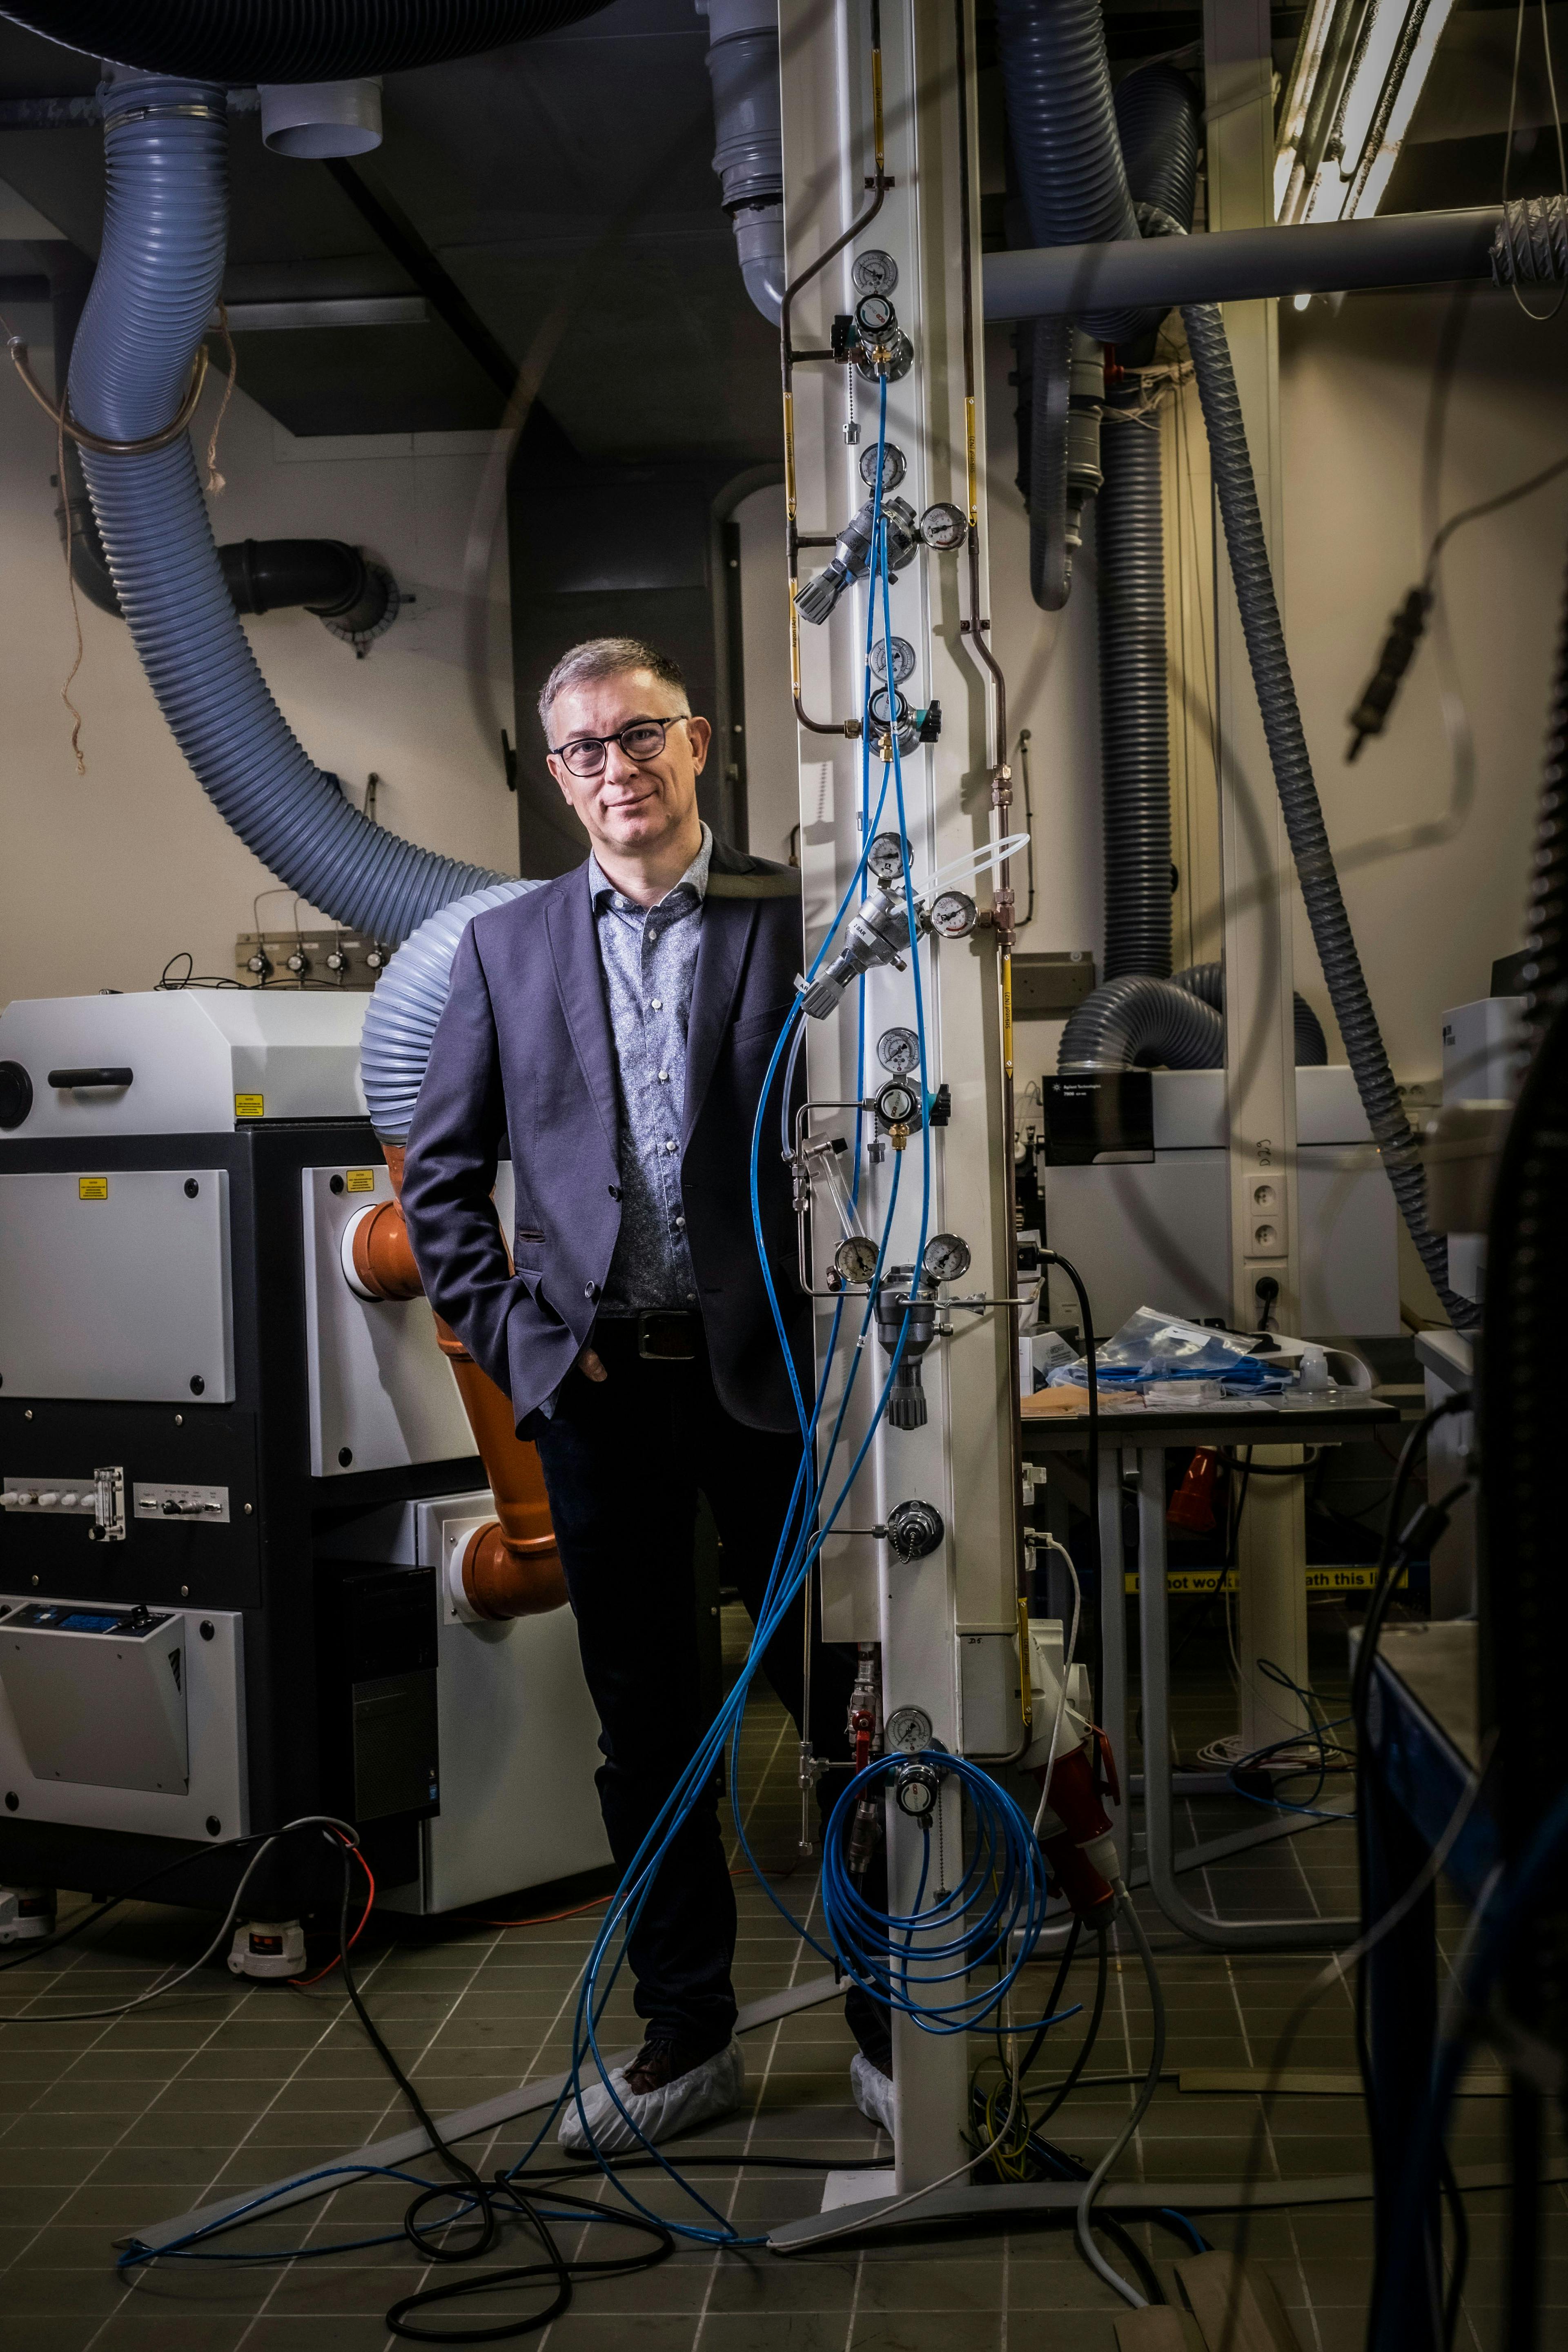 A Combustion-Based Sample Introduction System for Direct Isotopic Analysis of Mercury in Solid Samples via Multi-Collector ICP-Mass Spectrometry: An Interview with Theophilus Redwood Prize Winner Frank Vanhaecke